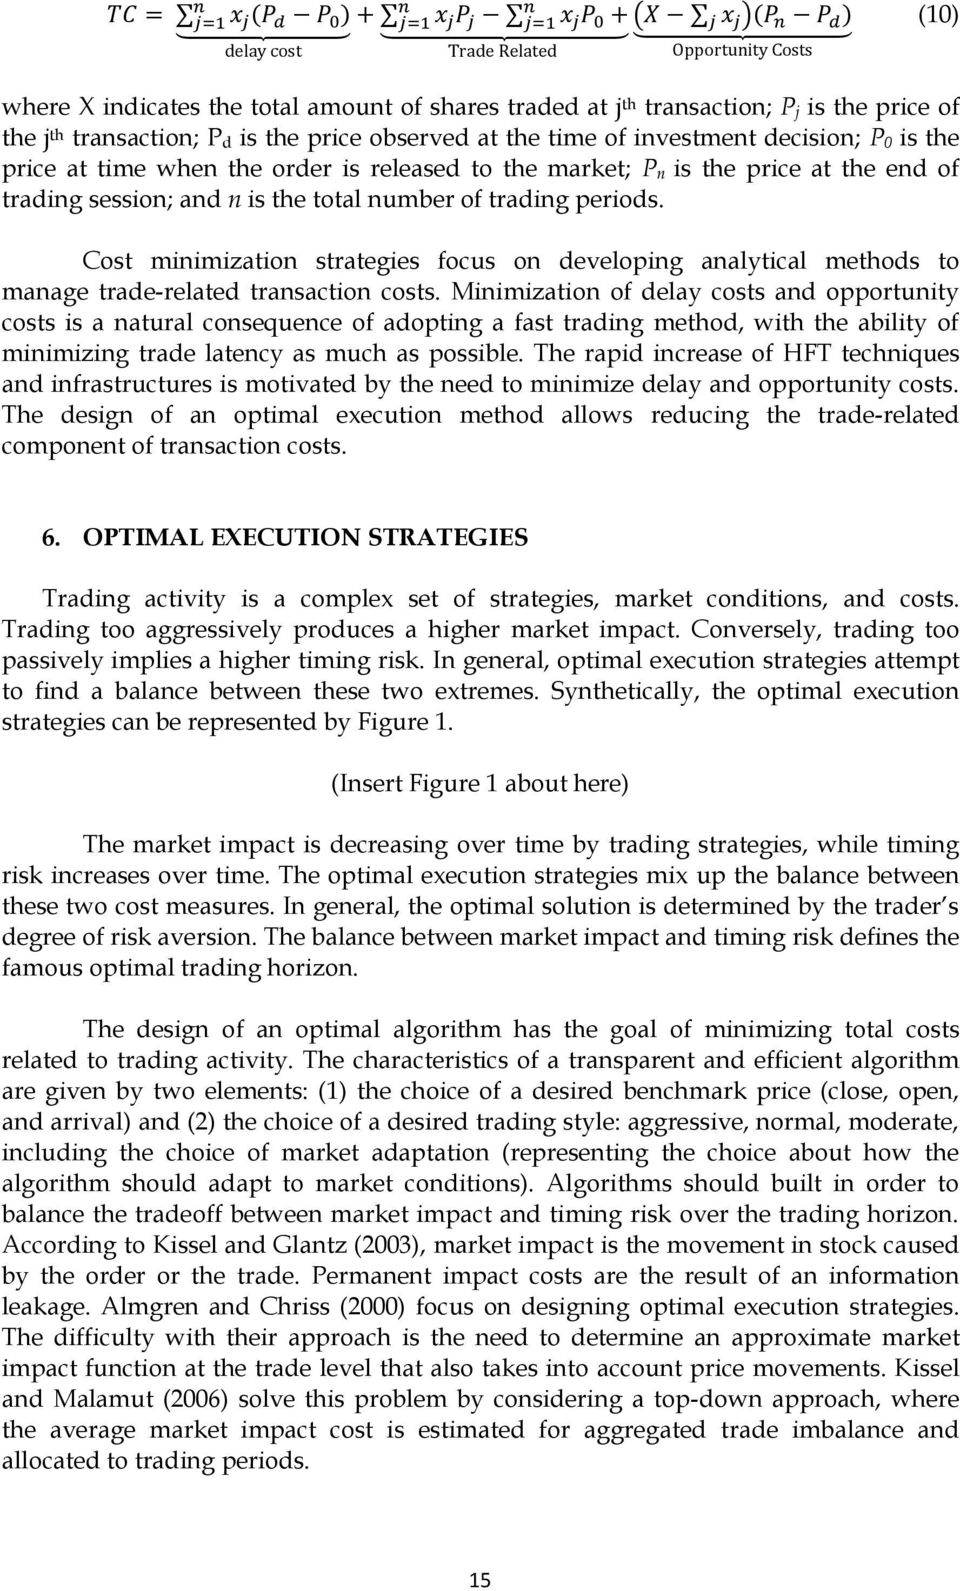 Cost minimization strategies focus on developing analytical methods to manage trade-related transaction costs.